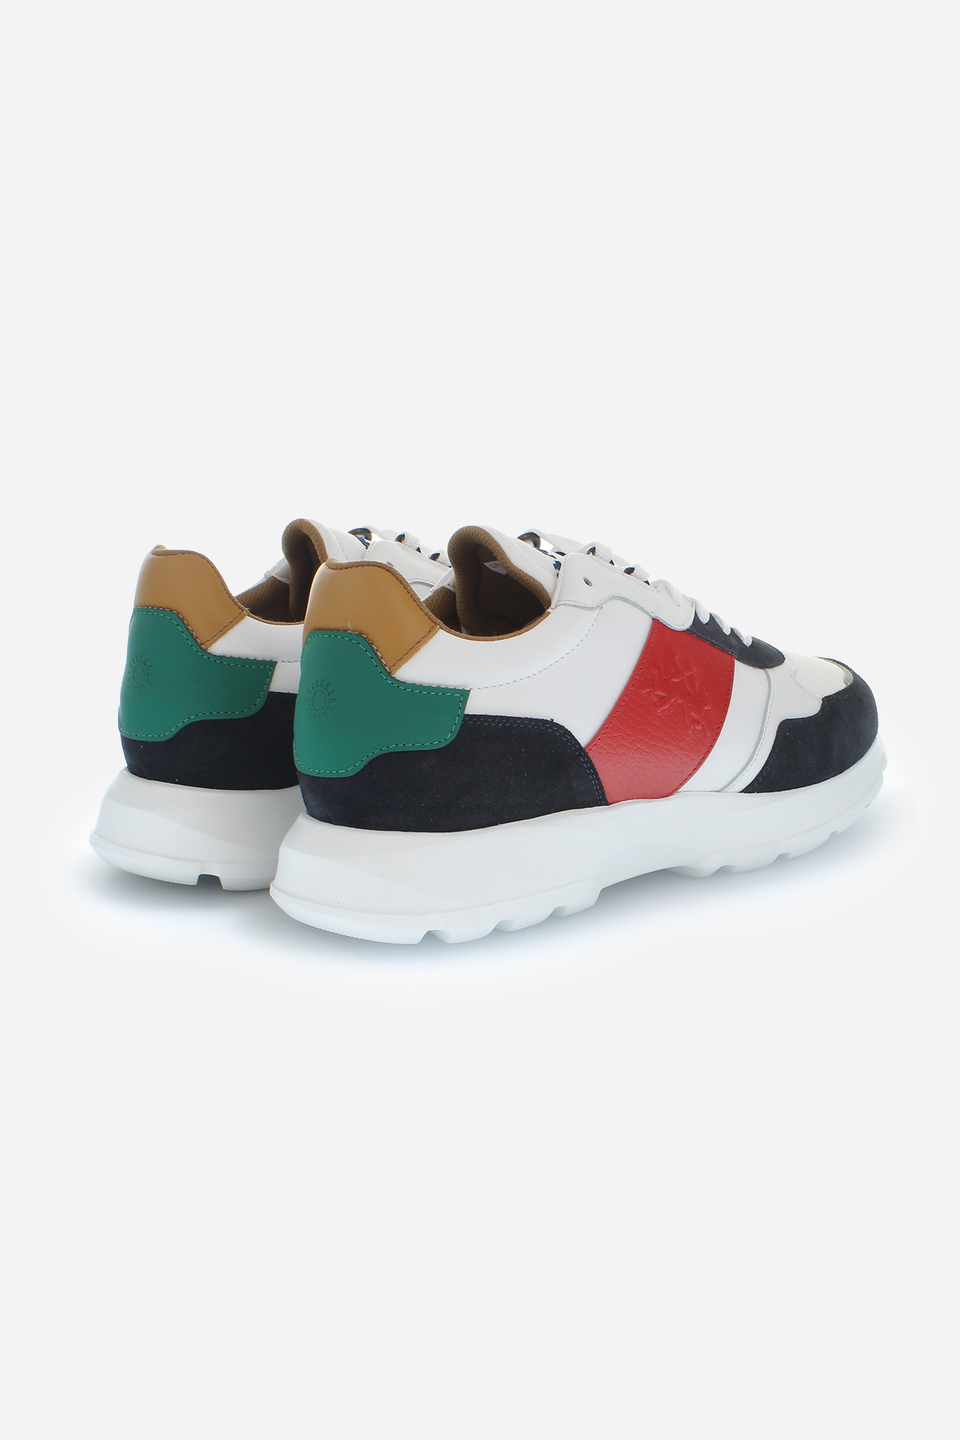 Trainers in mix of leather, fabric and suede | La Martina - Official Online Shop